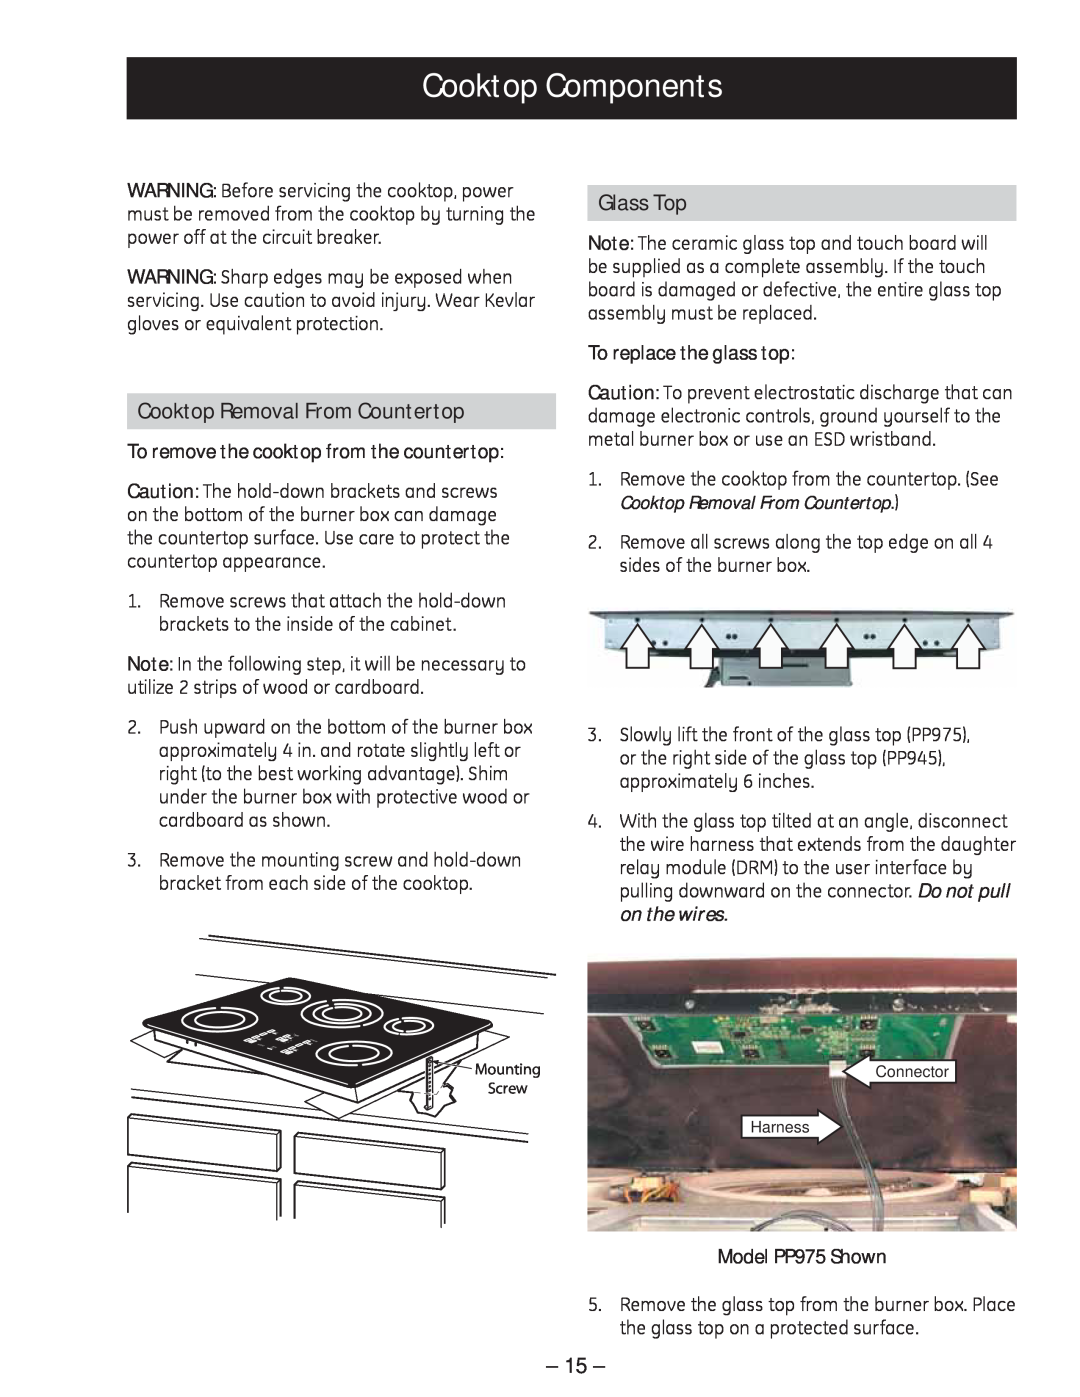 GE PP975, PP945 manual Cooktop Components, Cooktop Removal From Countertop, Glass Top 